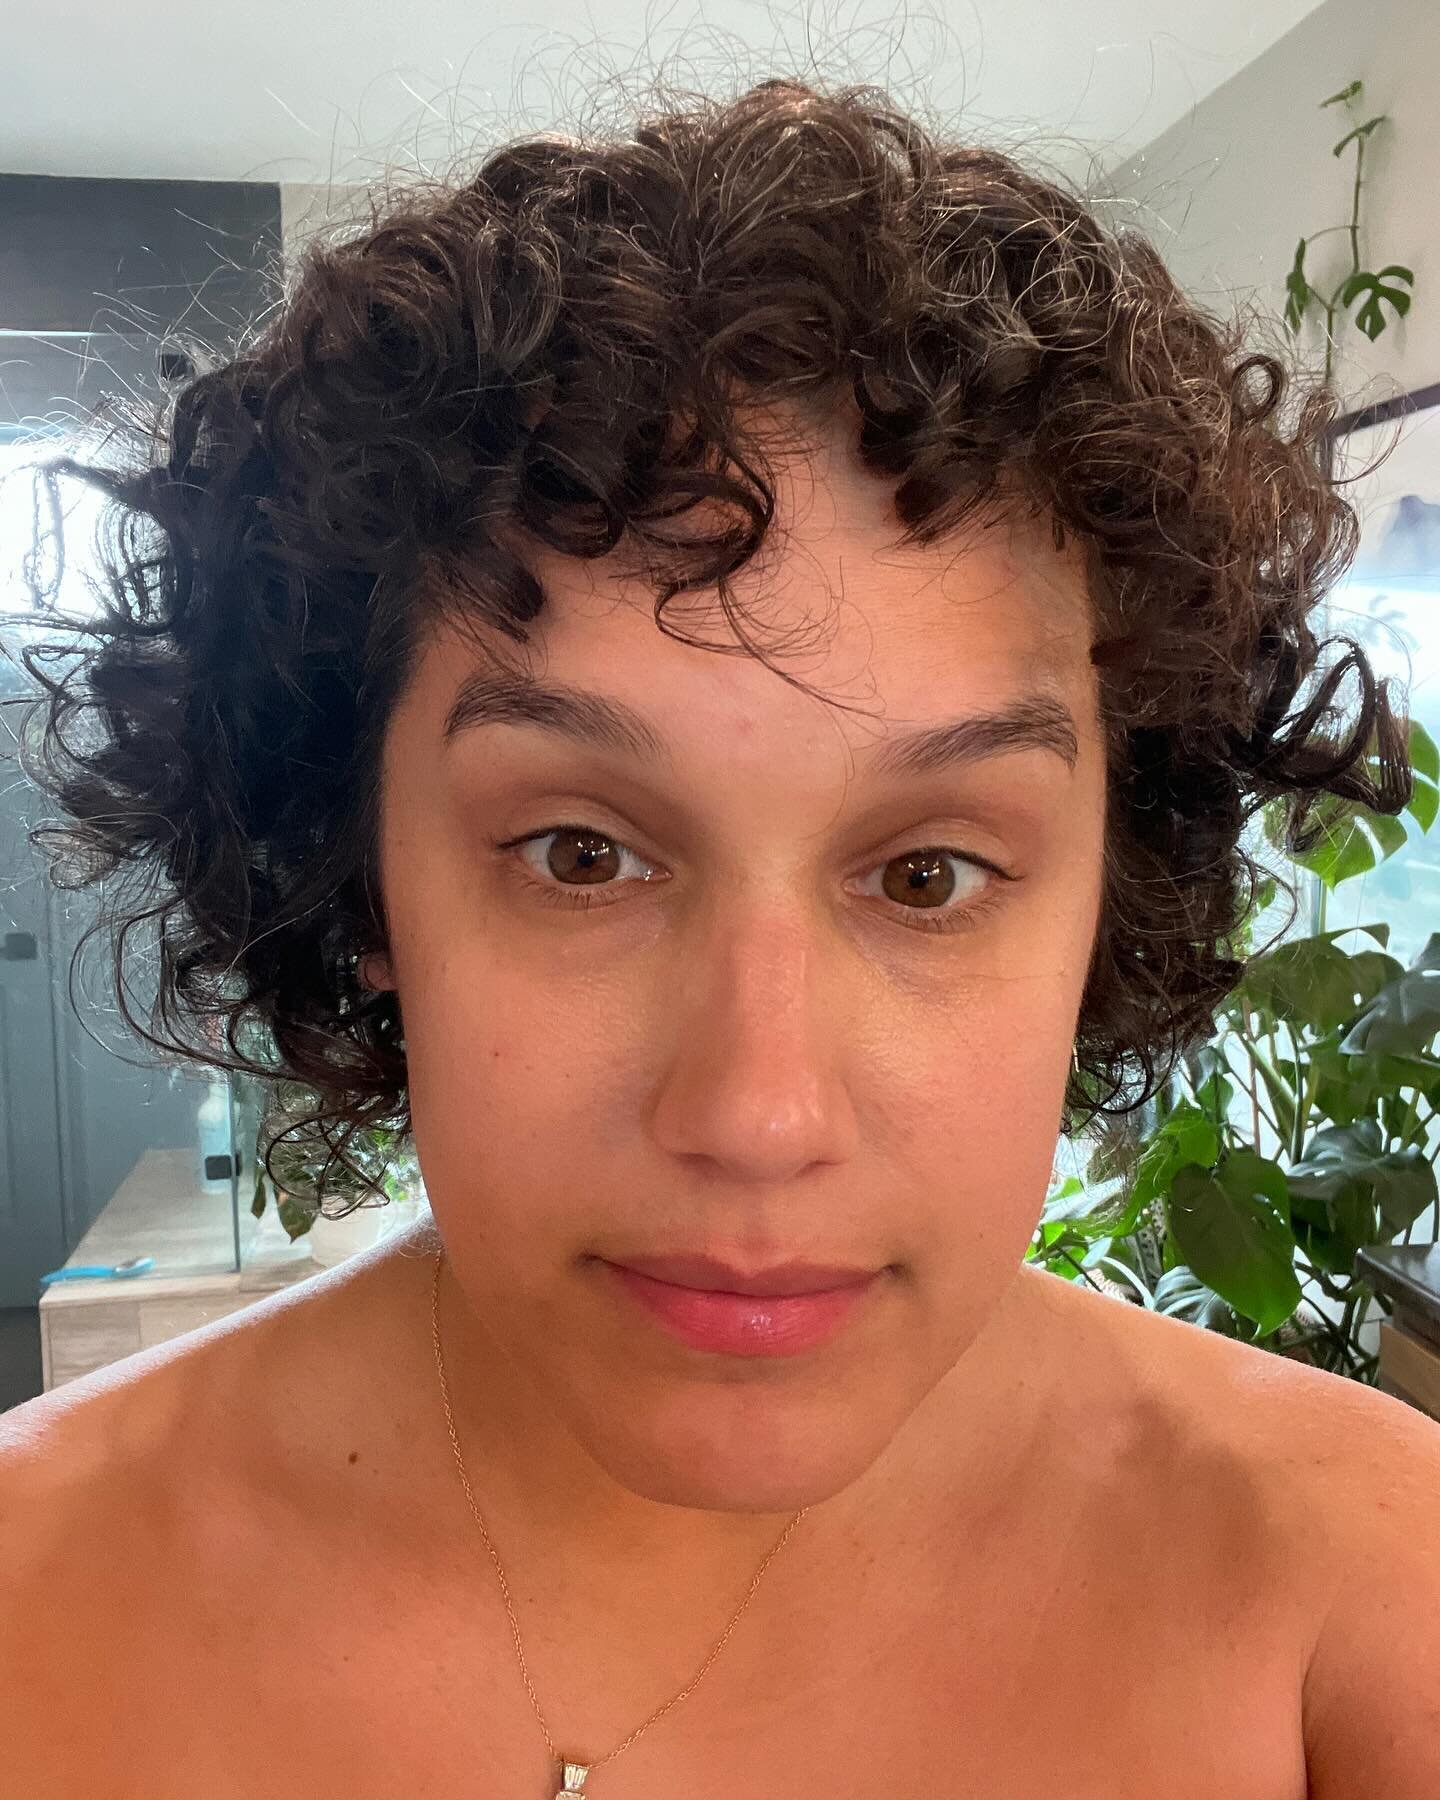 no, i didn&rsquo;t cut my hair again. this is a wash day and styling routine gone horribly wrong and i am posting it to publicly shame myself into NEVER CUTTING MY HAIR SHORT AGAIN. i deserve this self-imposed humiliation, so it shall live on my feed